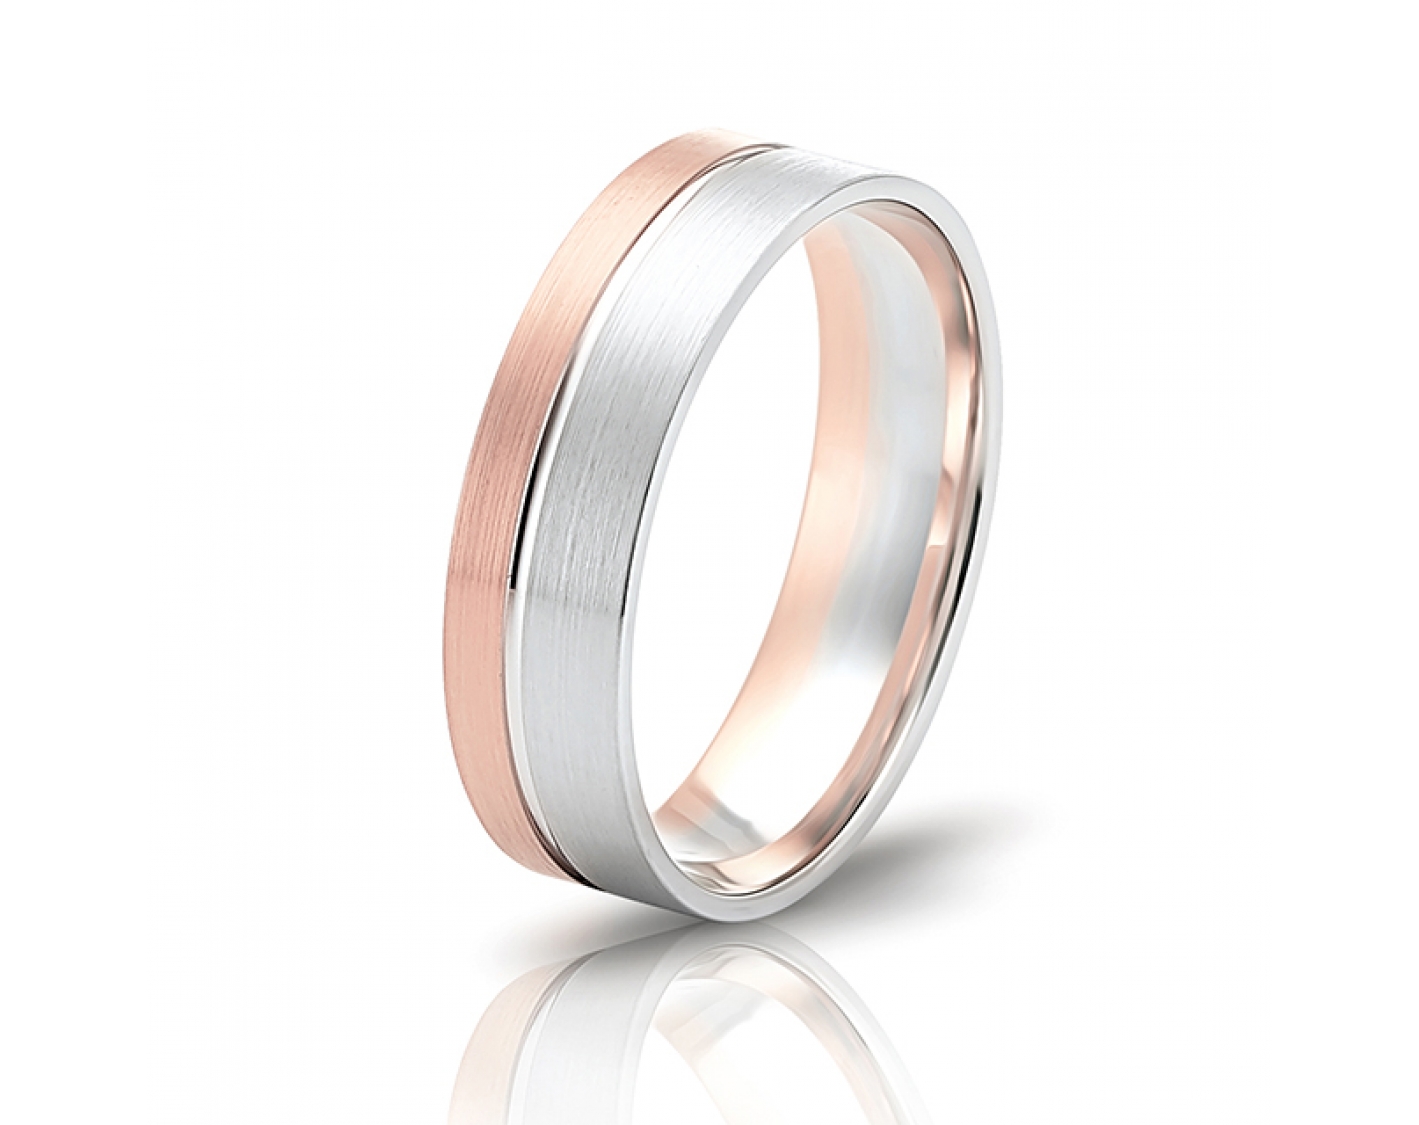 dual-tone 6mm two-toned* matte wedding band Photos & images